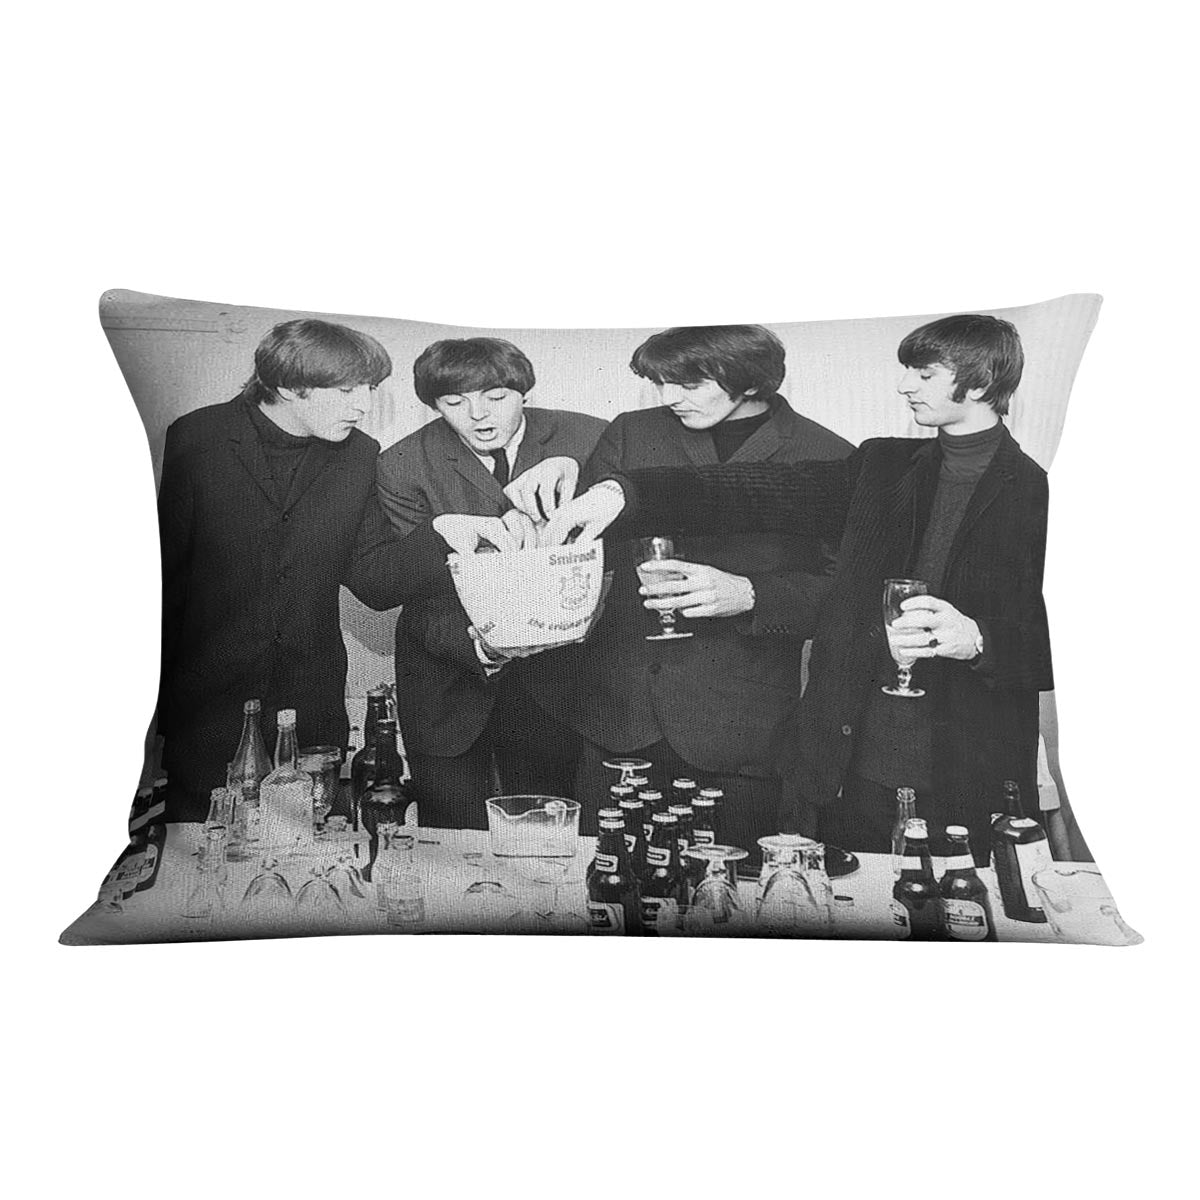 The Beatles with bottles of beer Cushion